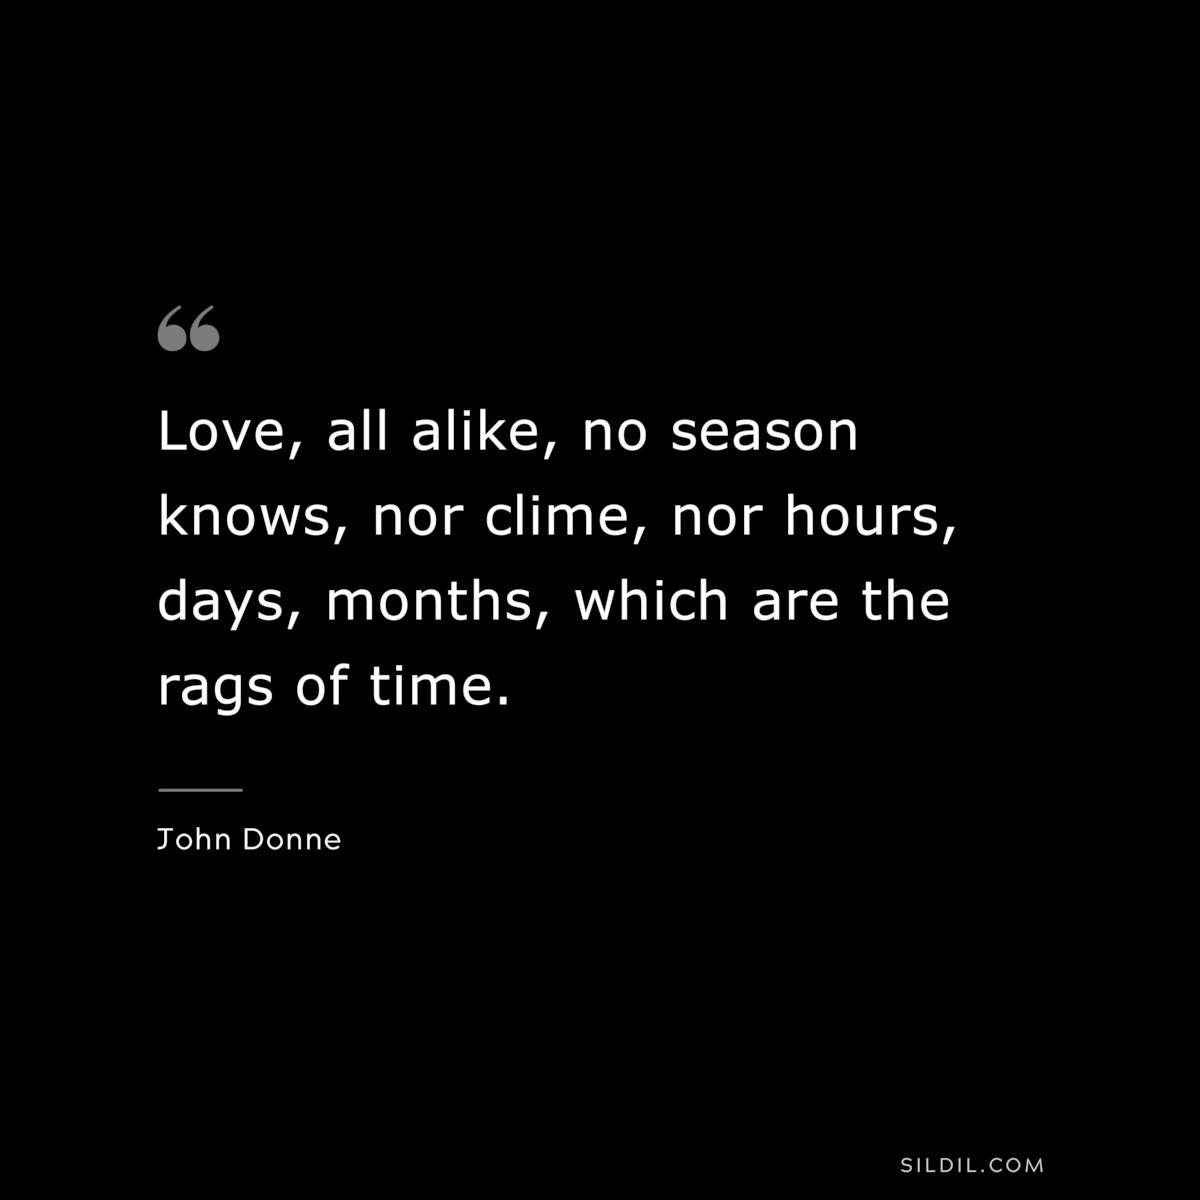 Love, all alike, no season knows, nor clime, nor hours, days, months, which are the rags of time. ― John Donne